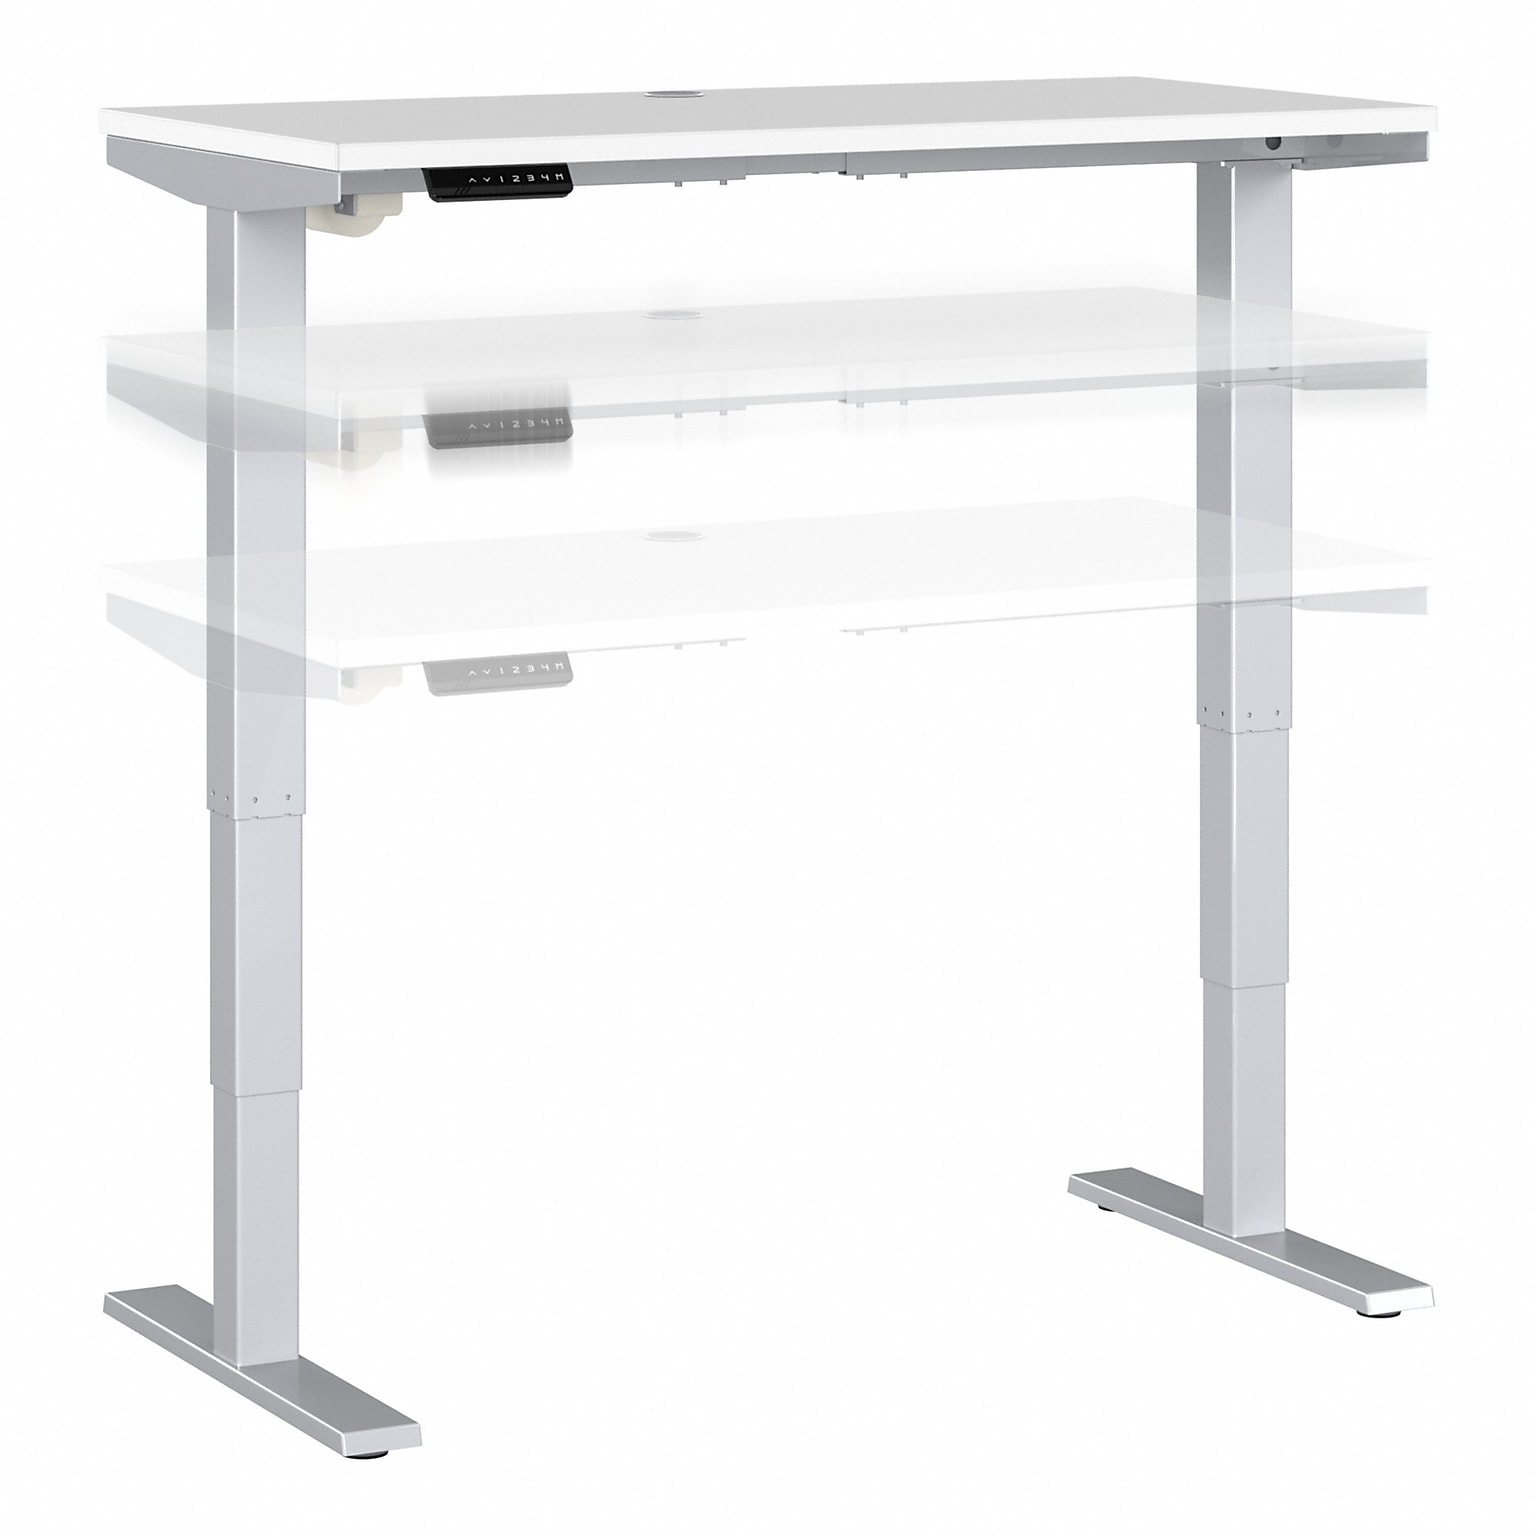 Bush Business Furniture Move 40 Series 48W Electric Height Adjustable Standing Desk, White/Cool Gray Metallic (M4S4824WHSK)